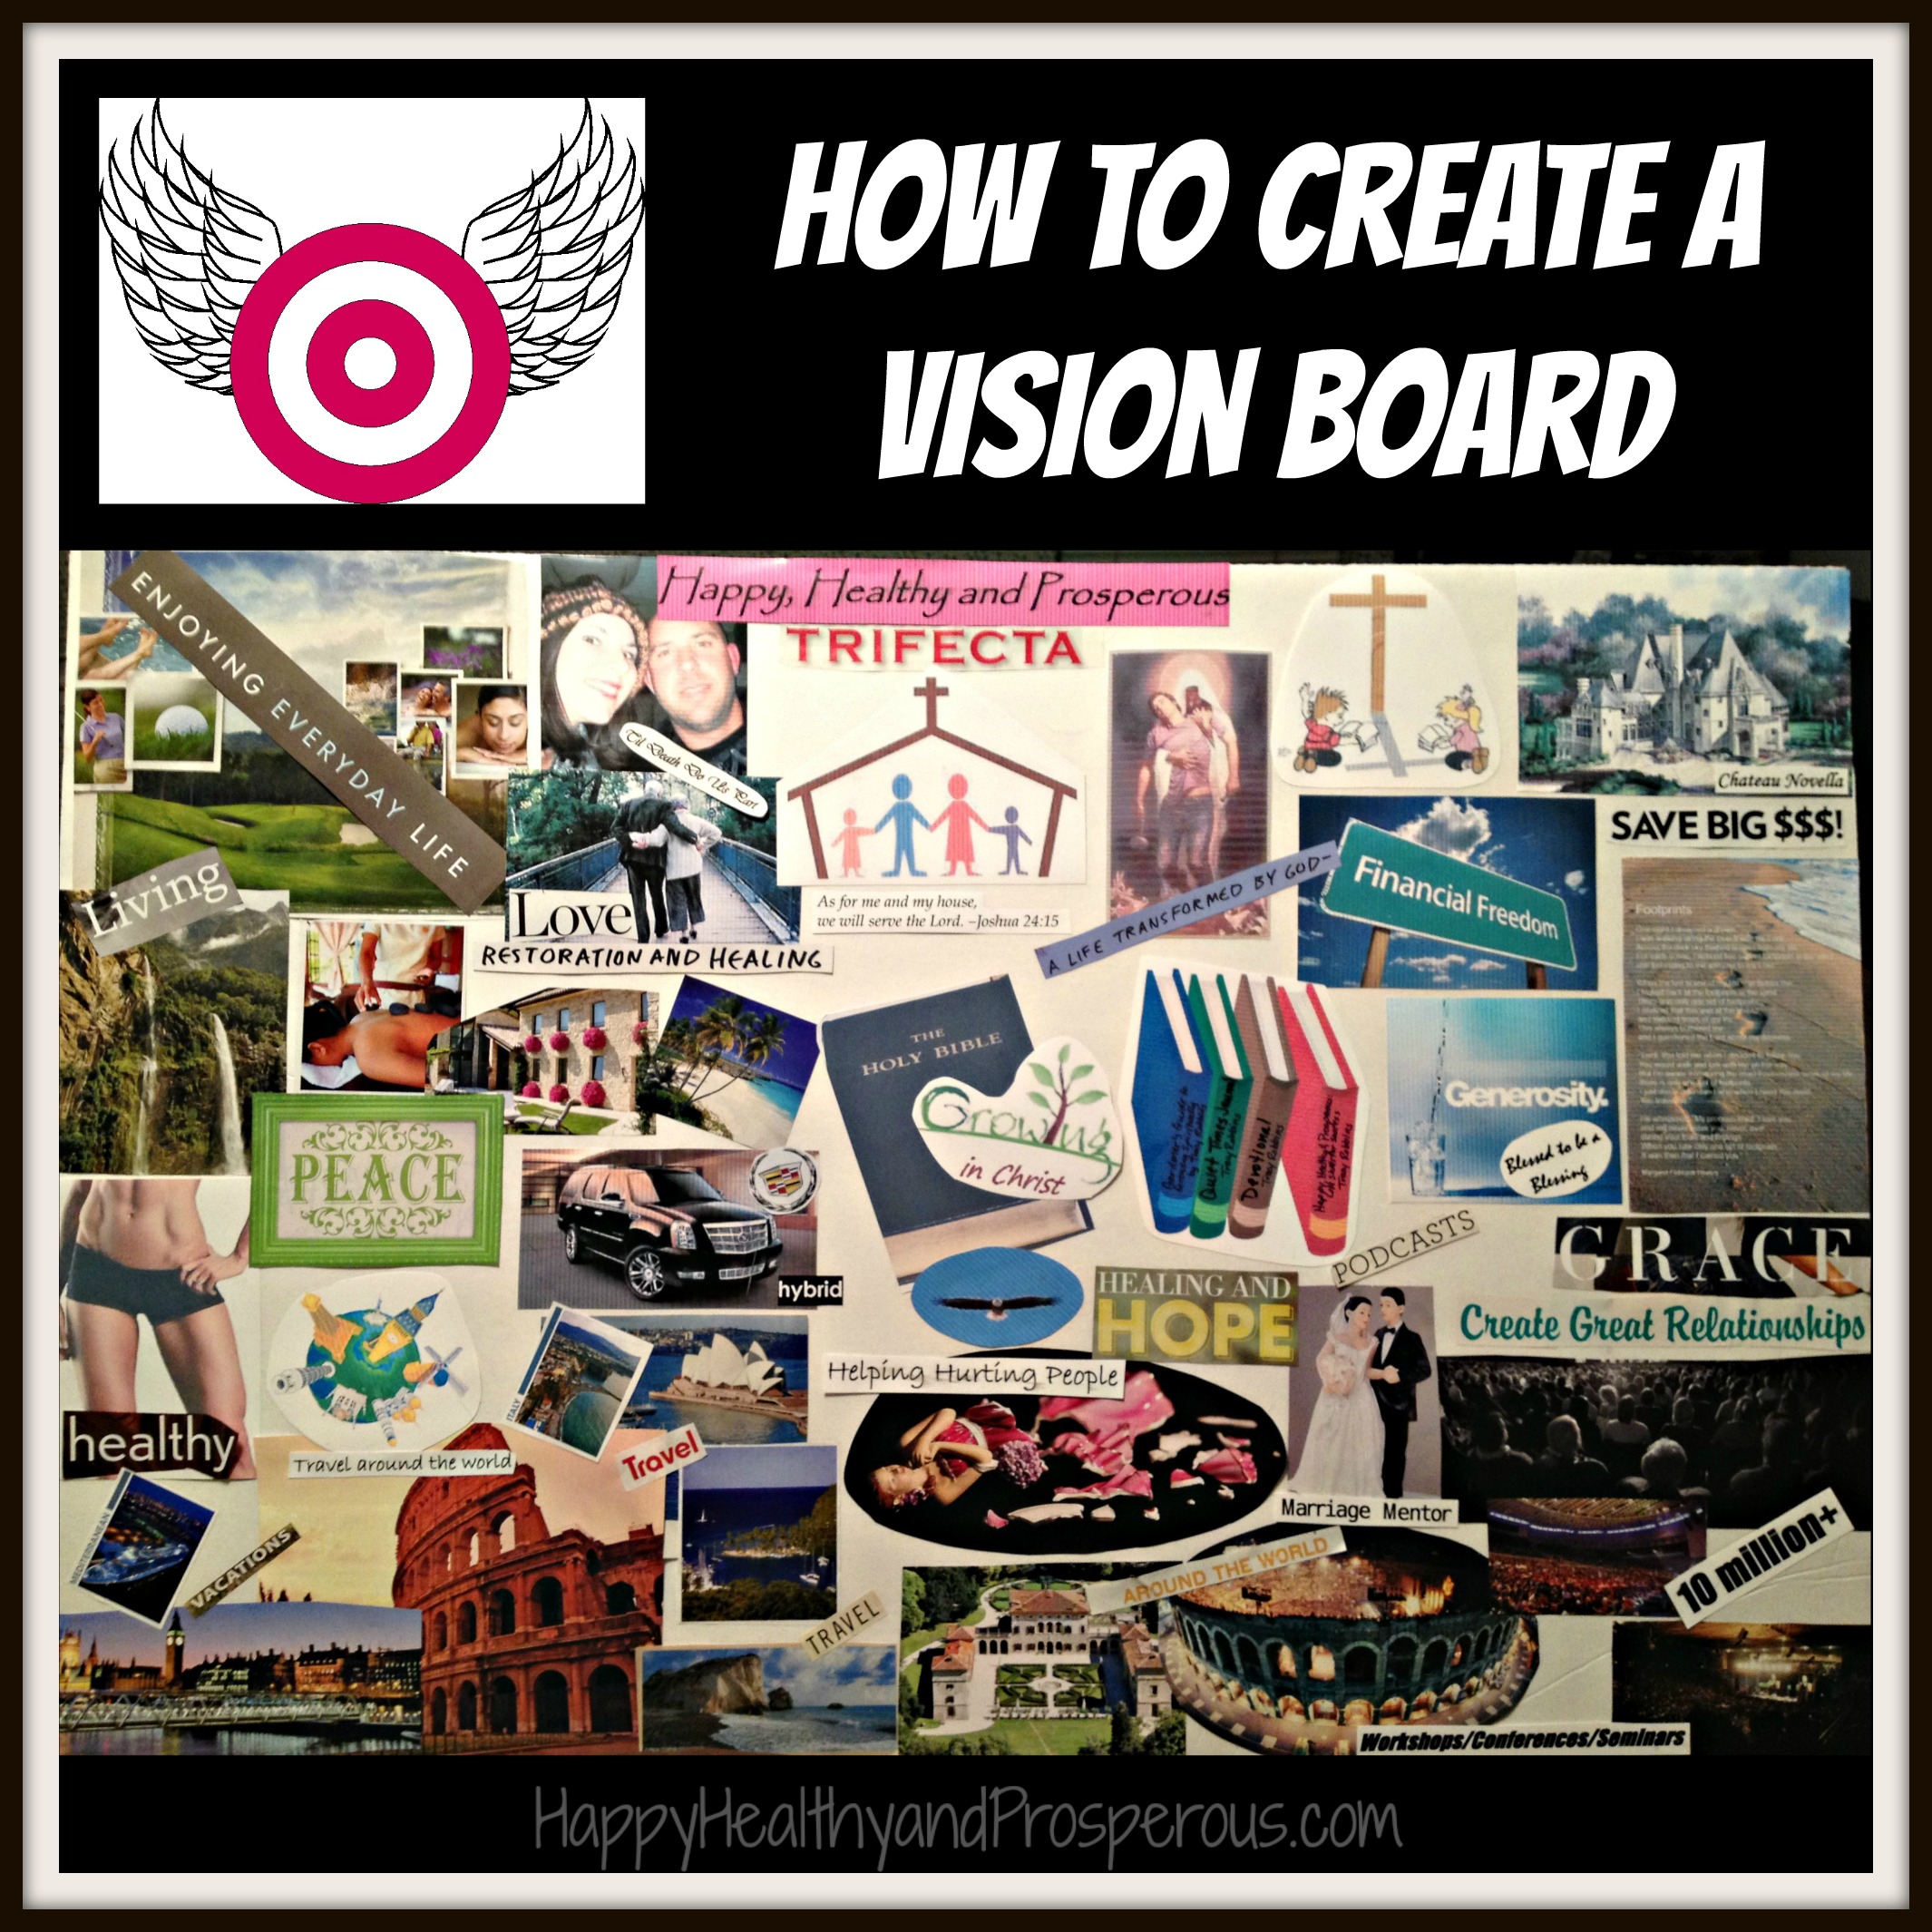 How to Create a Vision Board - Happy, Healthy & Prosperous